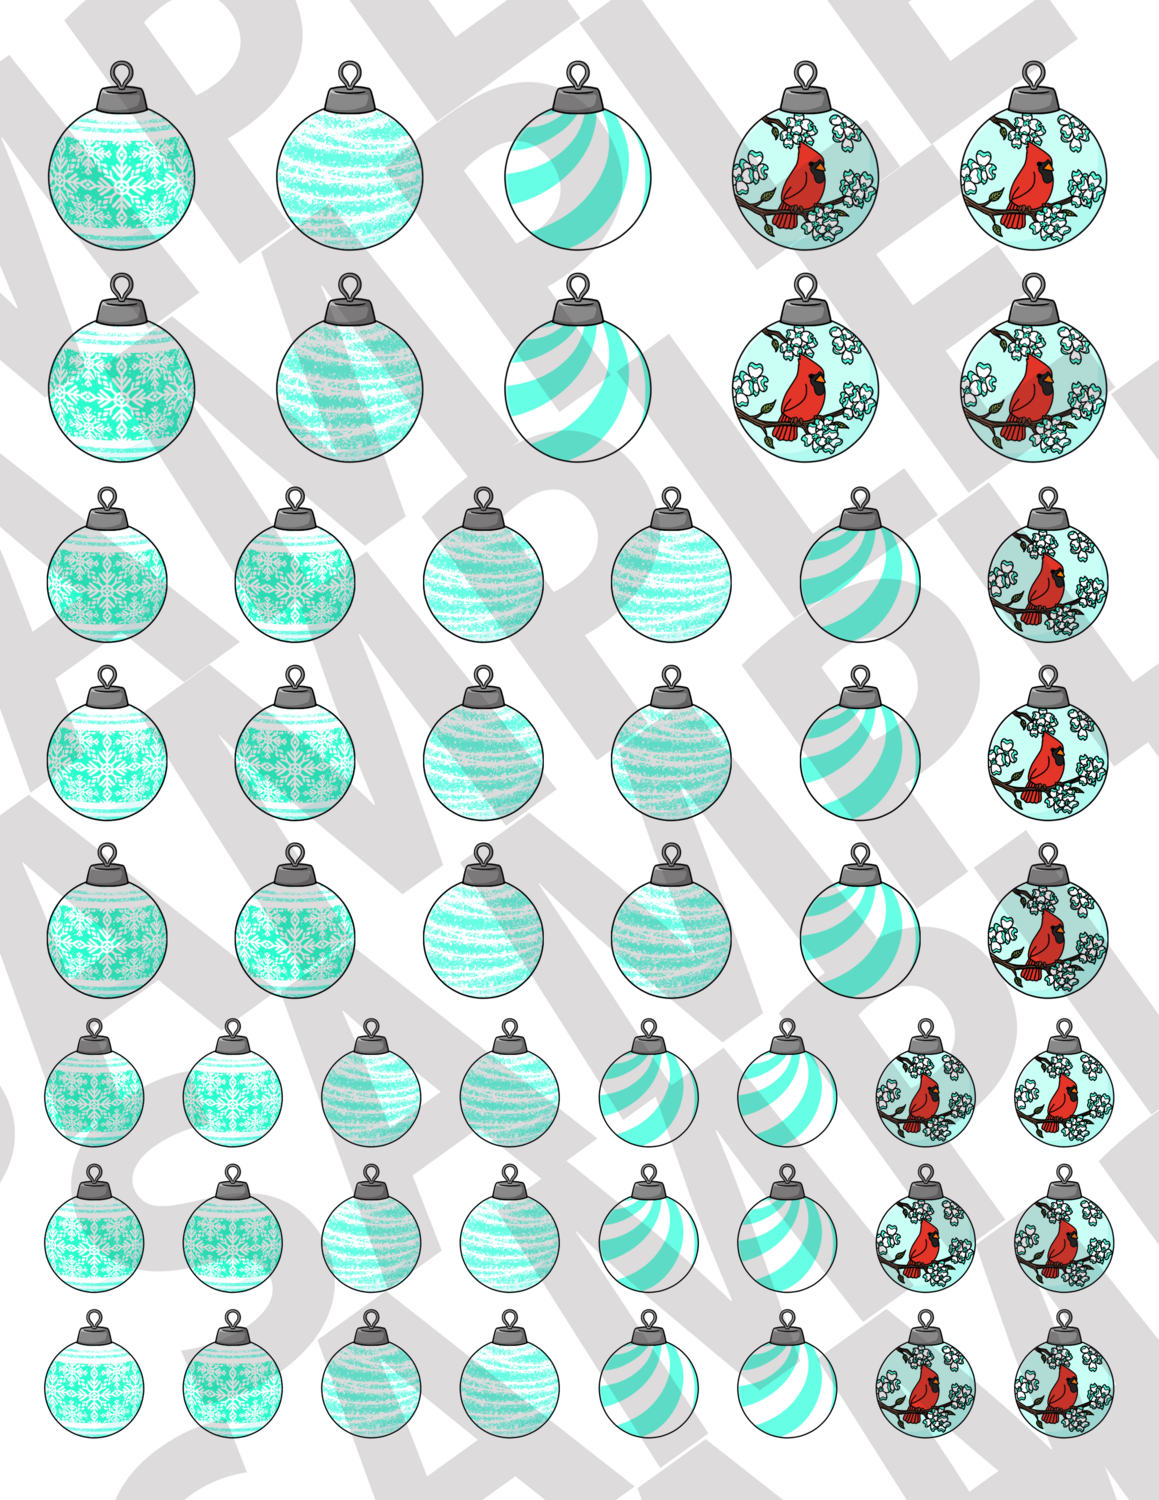 Turquoise - Smaller Ornaments